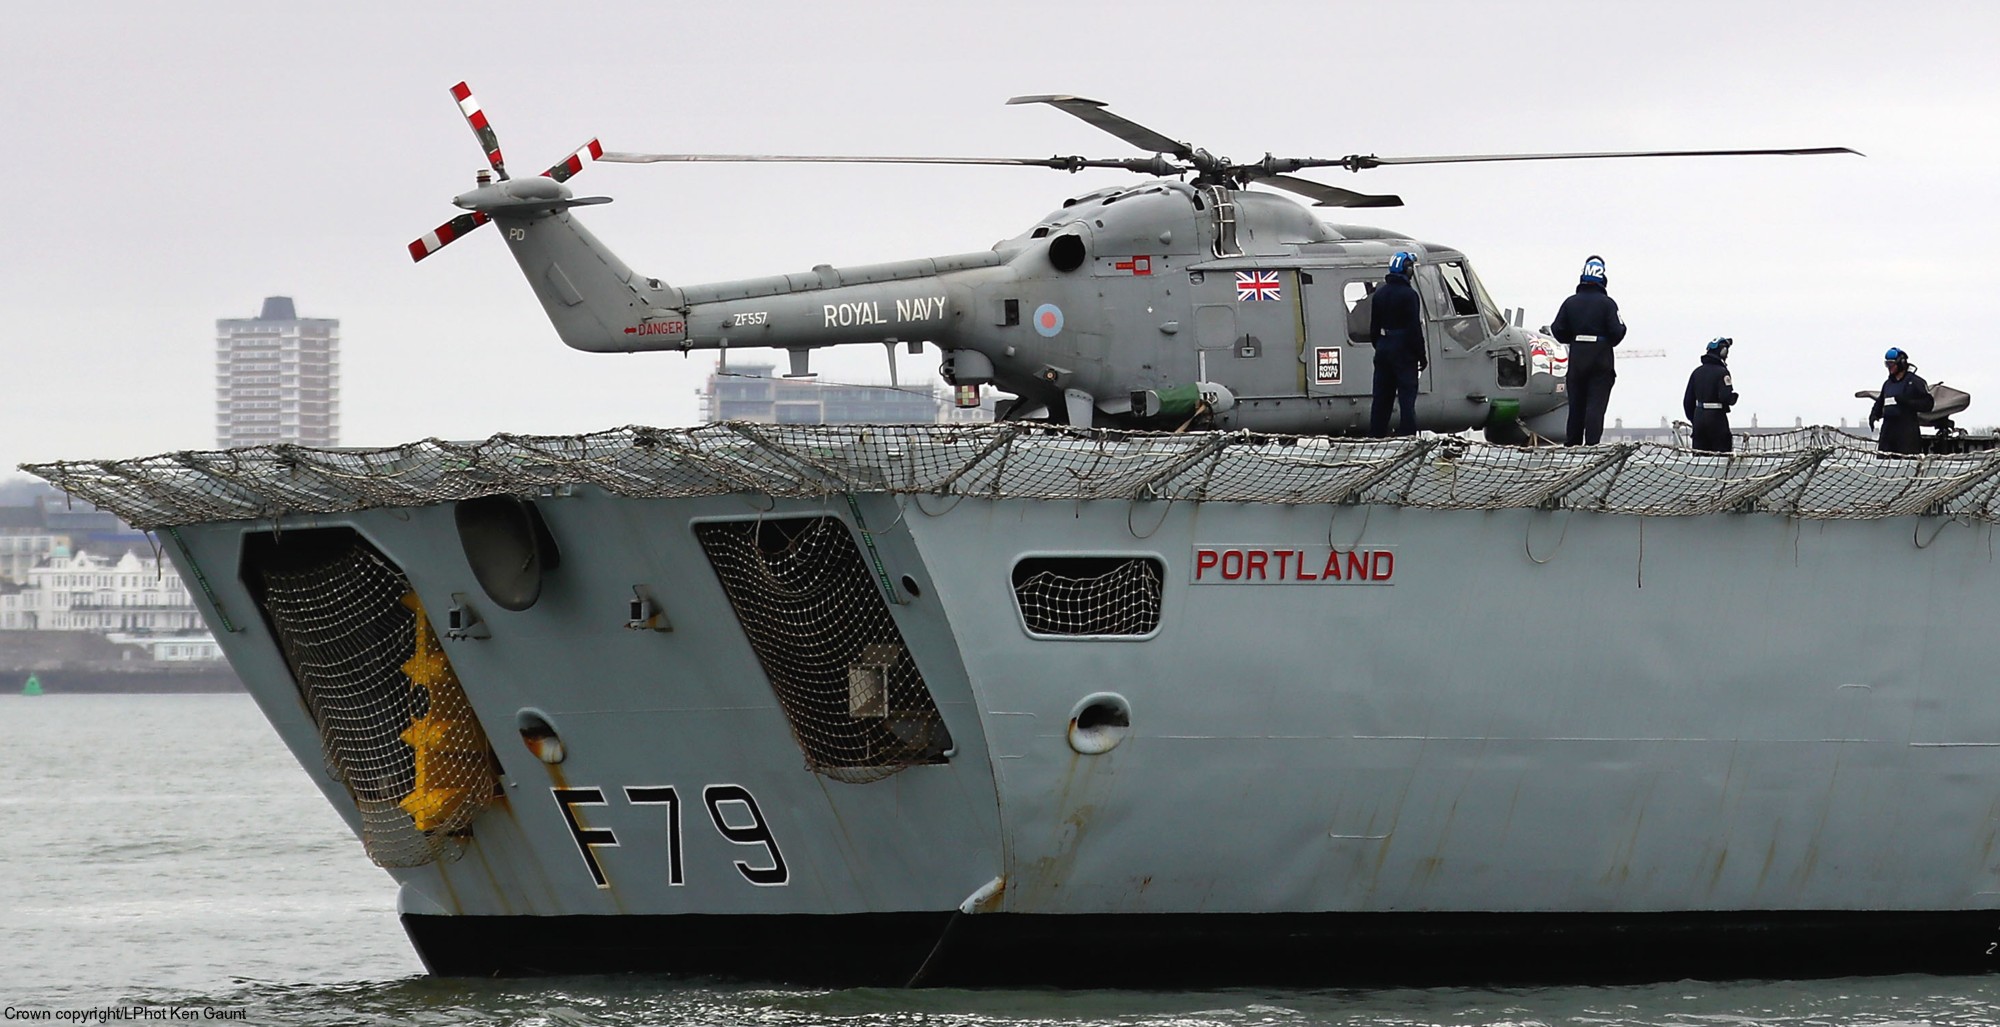 f-79 hms portland type 23 duke class guided missile frigate ffg royal navy 29 sea lynx helicopter